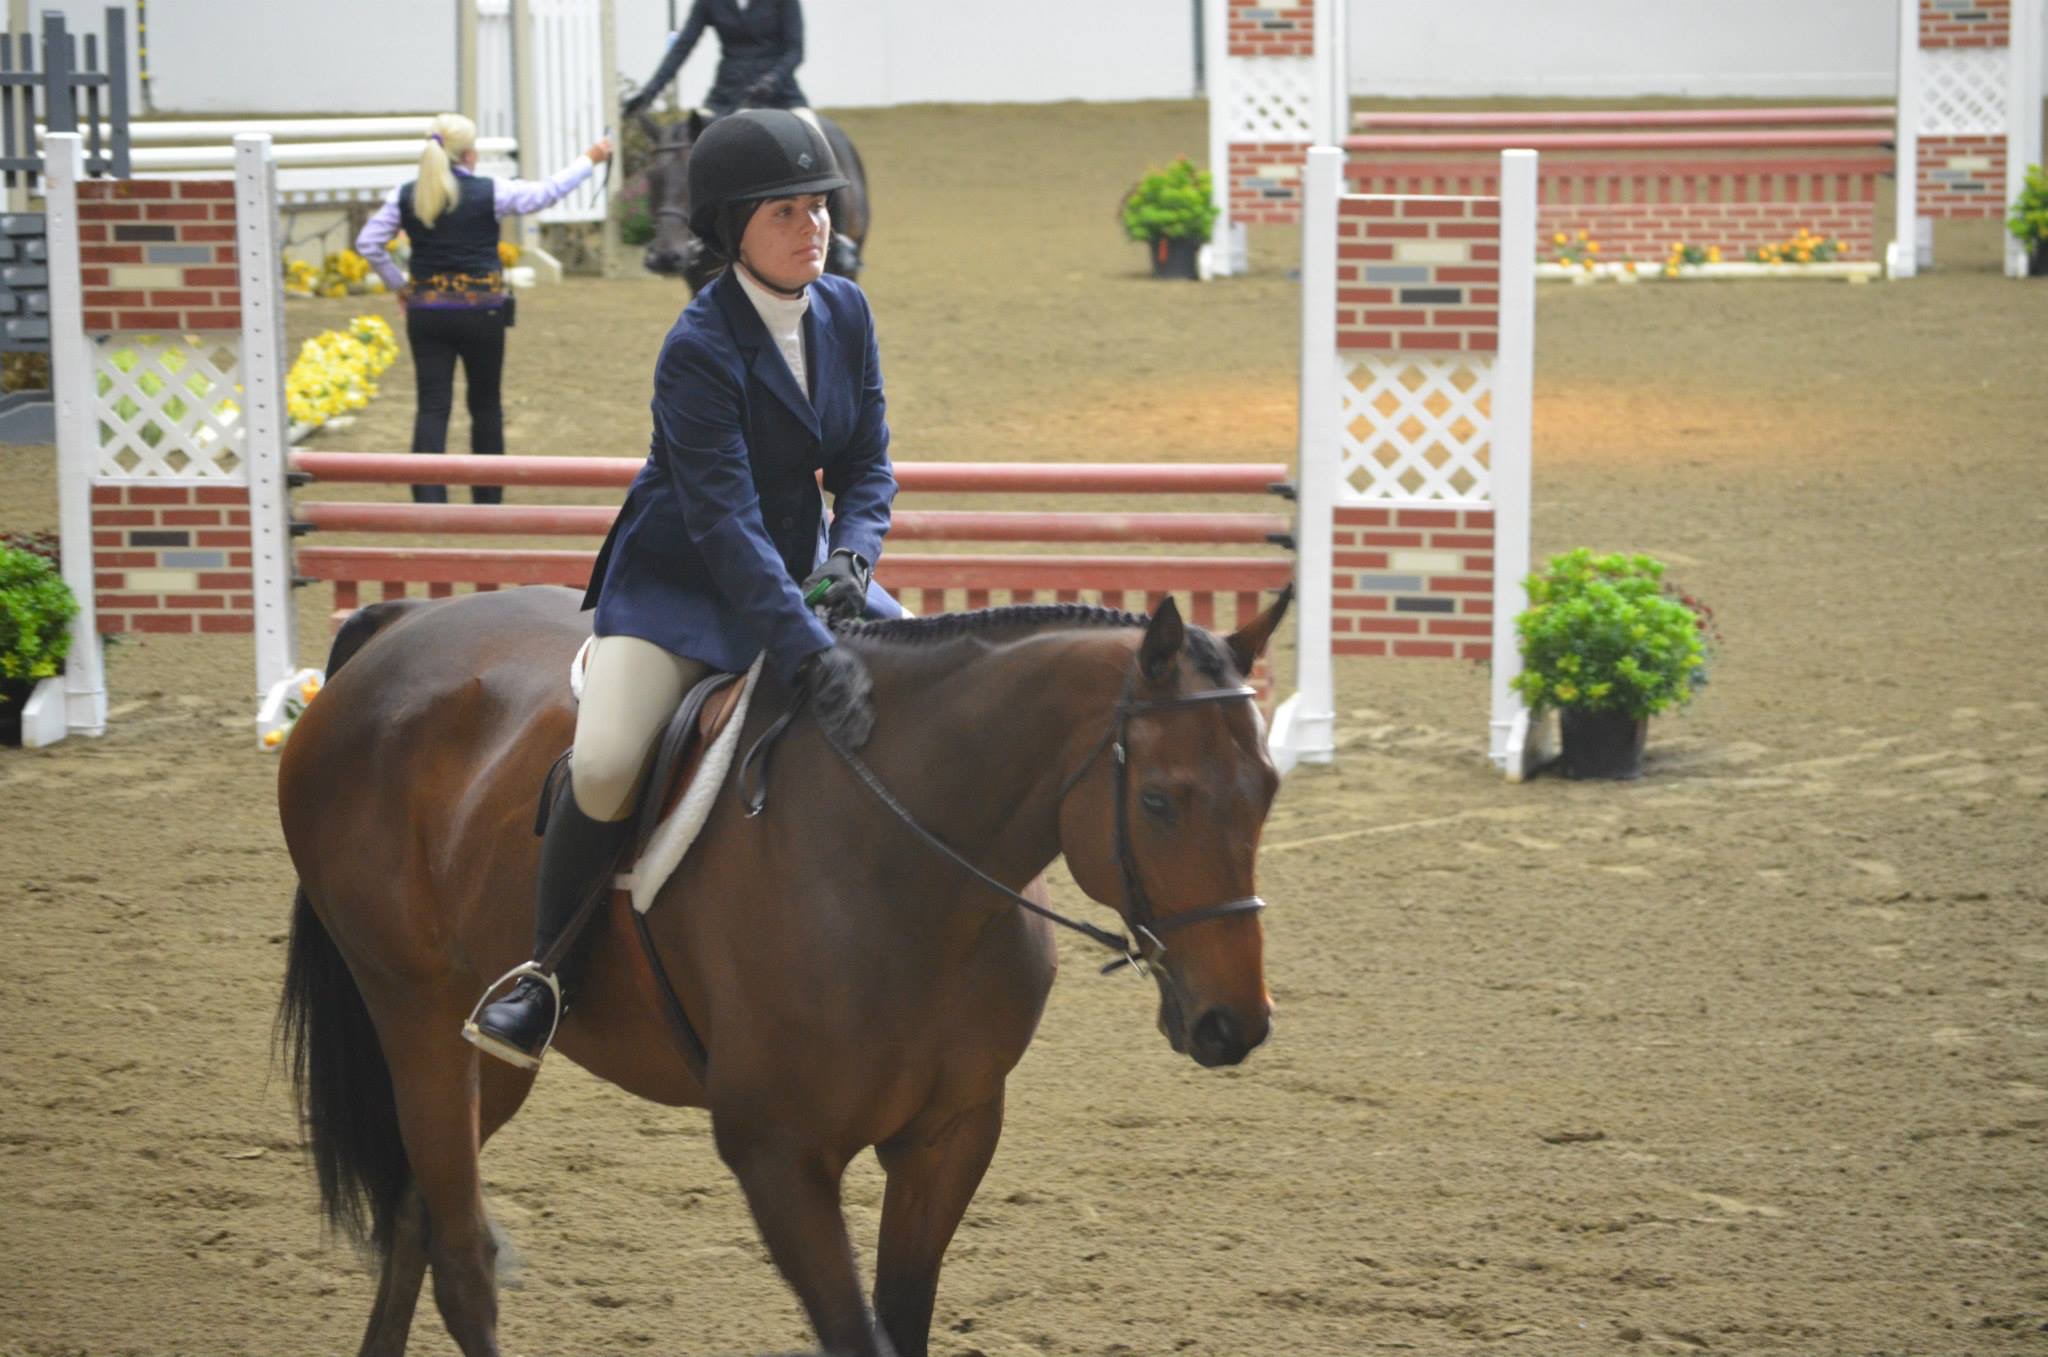 Hold on to your horses: University considers equestrian center | The ...